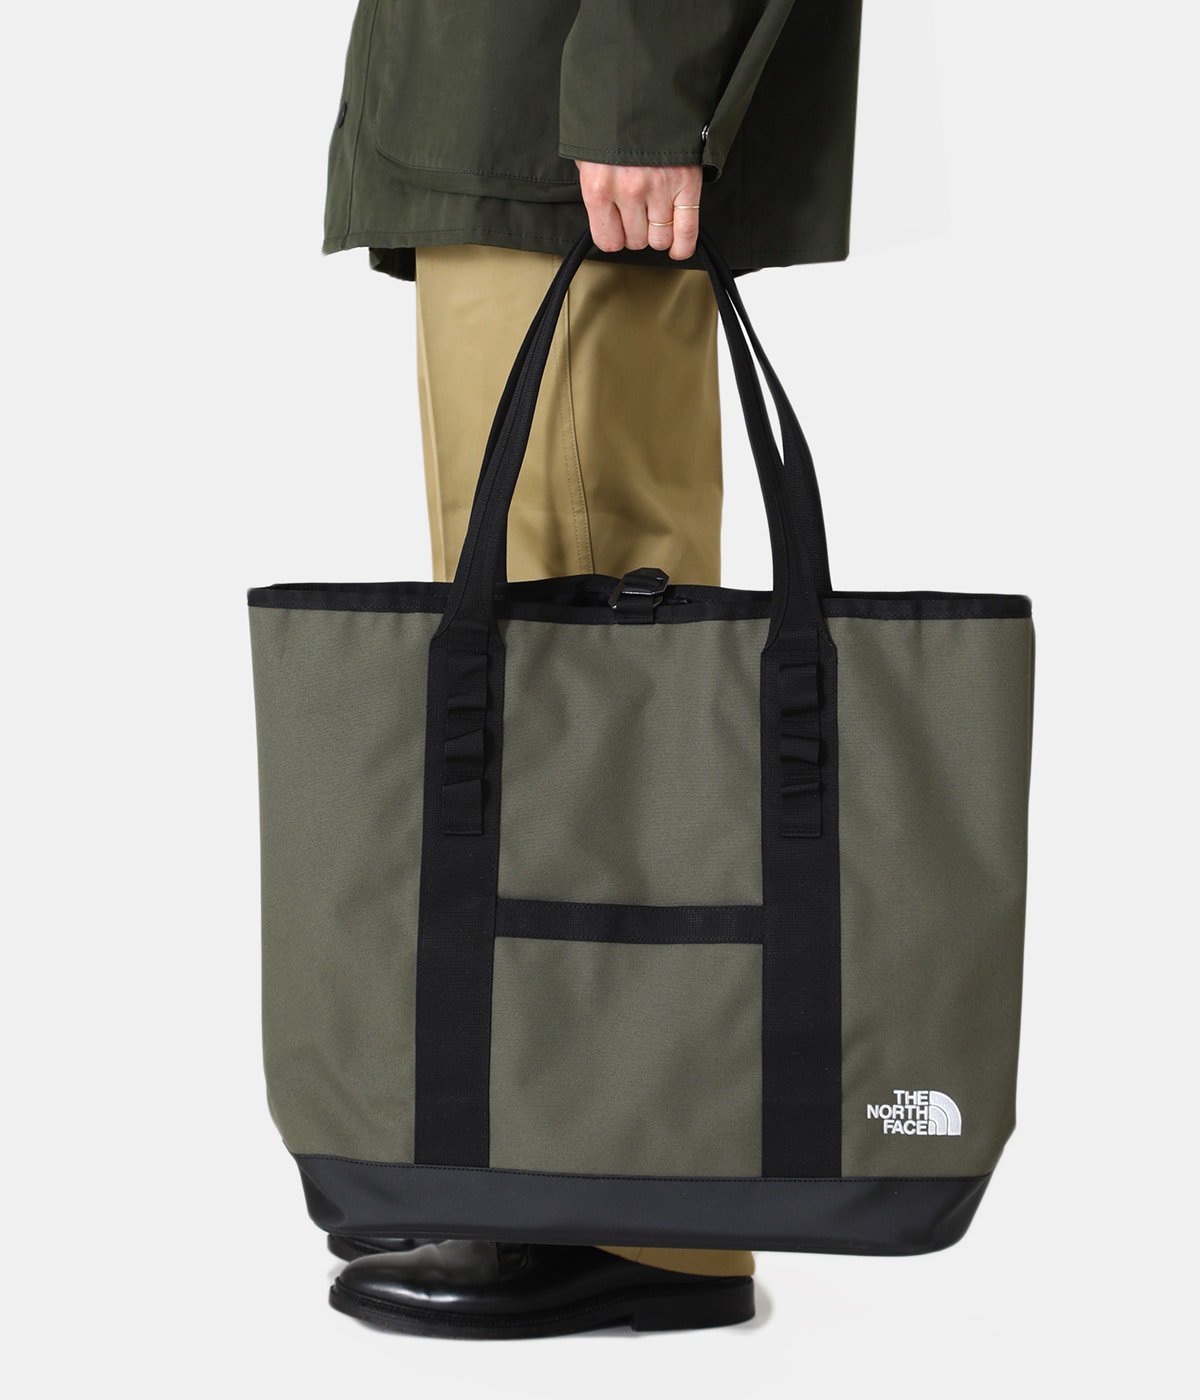 Fieludens Gear Tote S | THE NORTH FACE(ザ ノースフェイス) / バッグ トートバッグ (メンズ)の通販